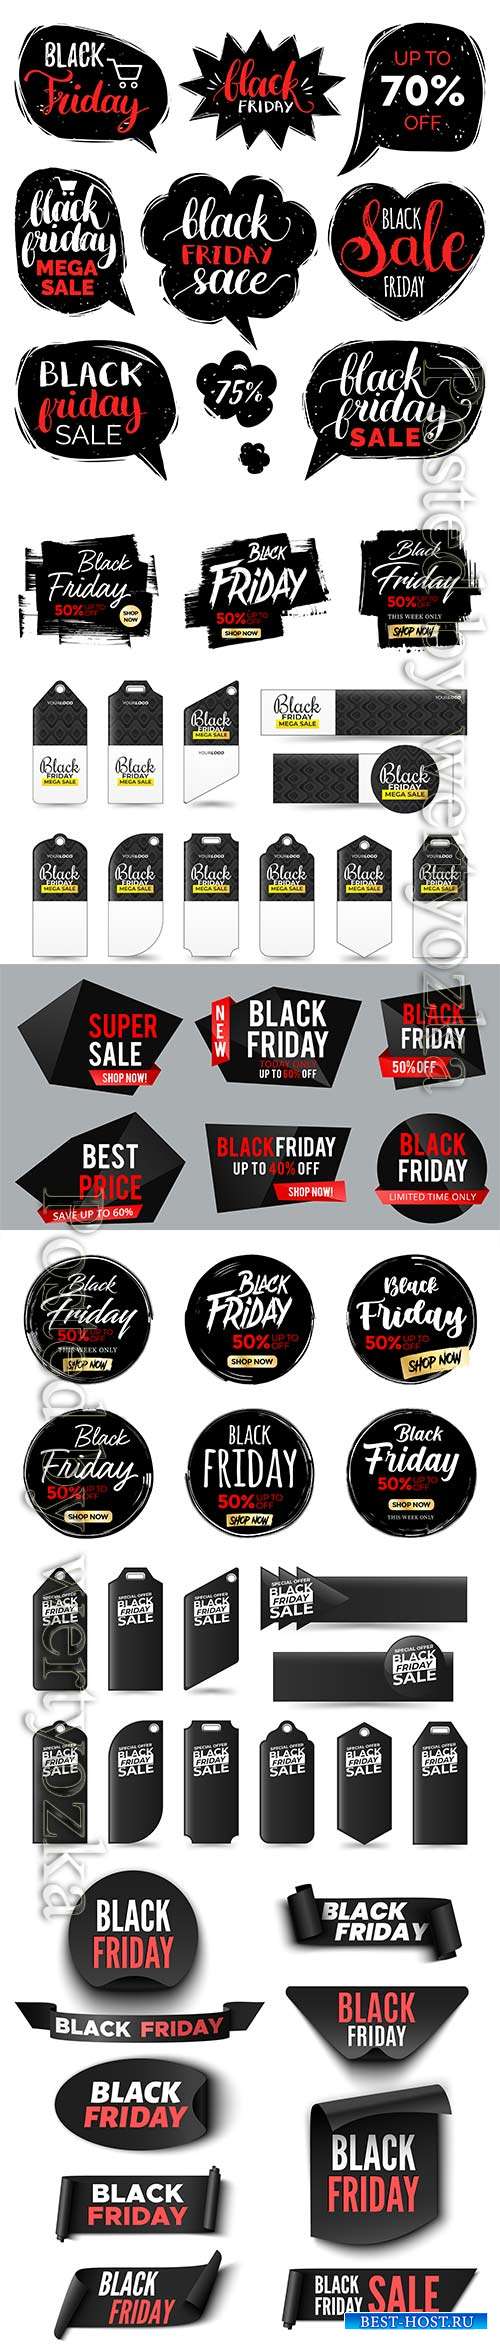 Set of black friday sale banners, ribbons and stickers